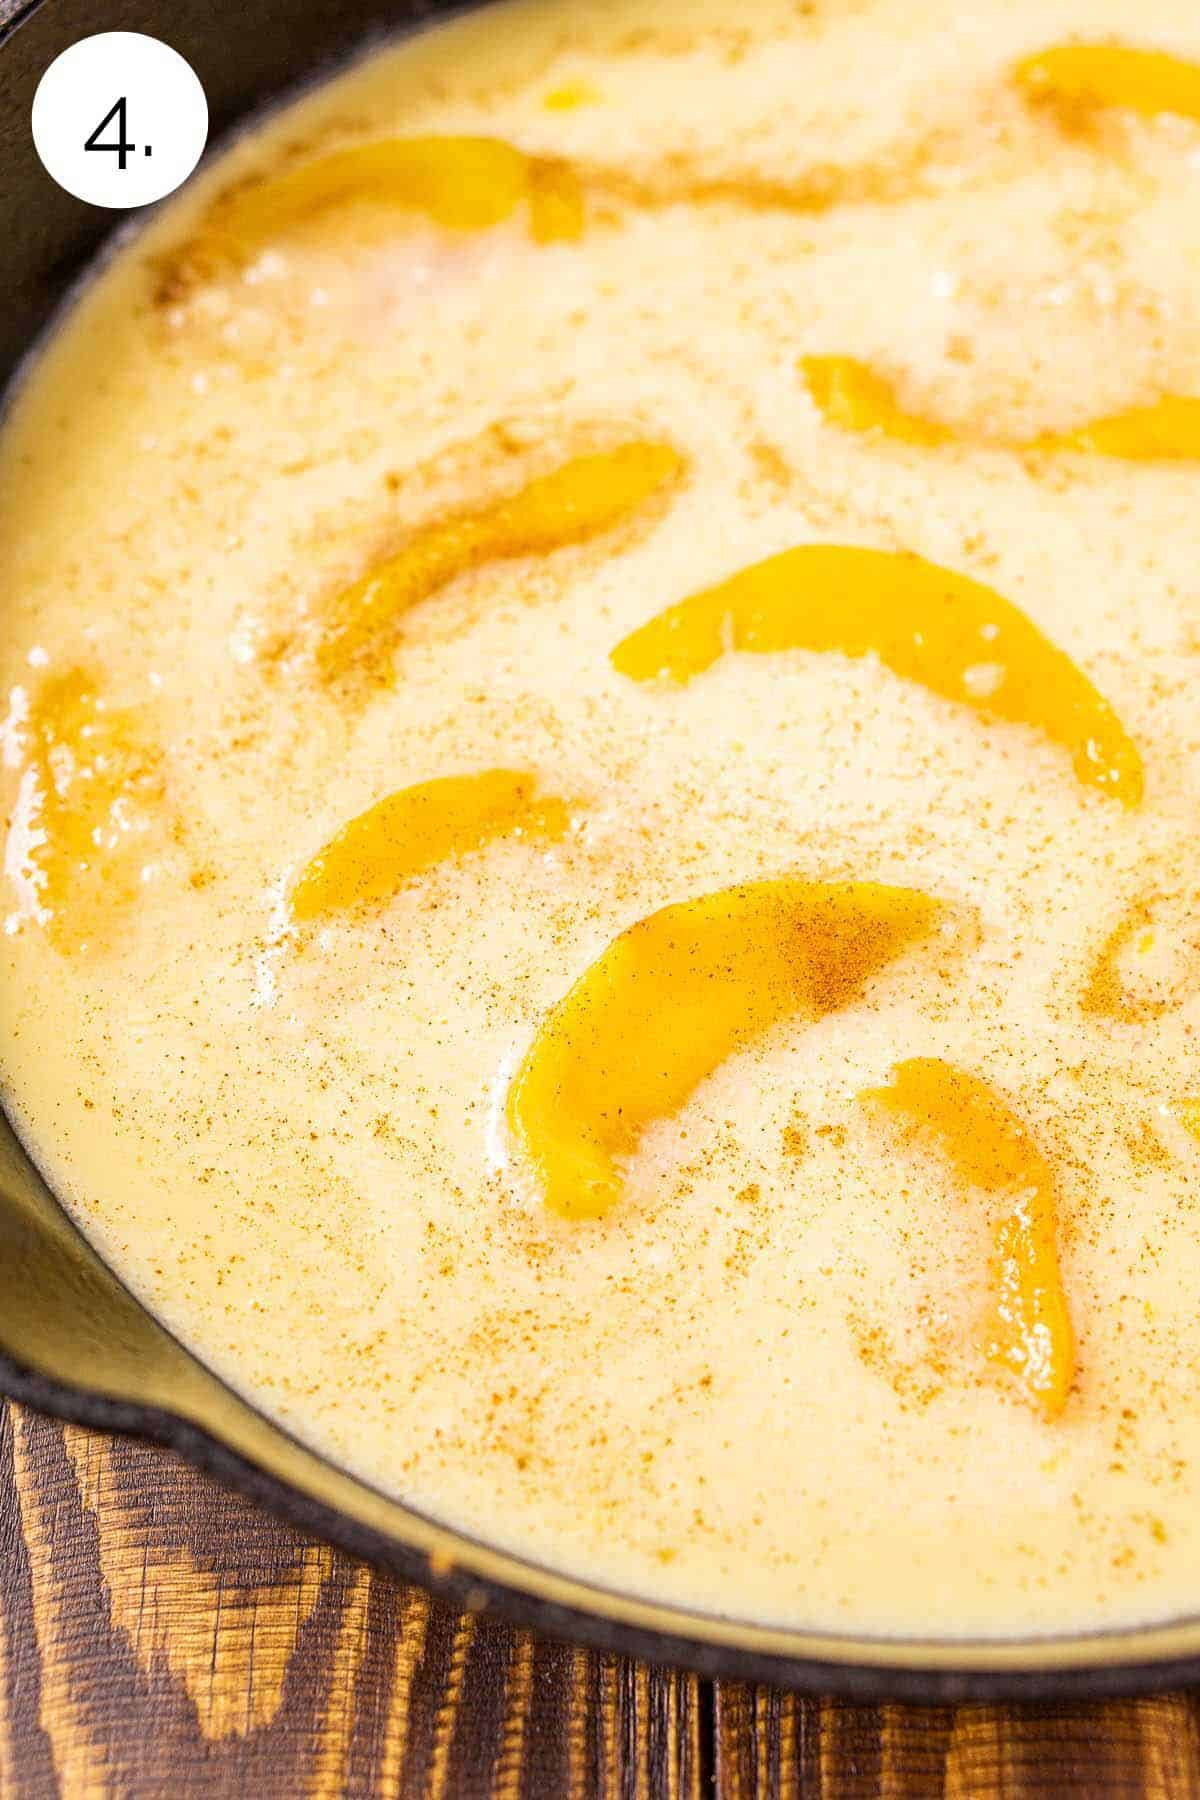 The clafoutis batter in a cast-iron skillet with peaches on top before baking.